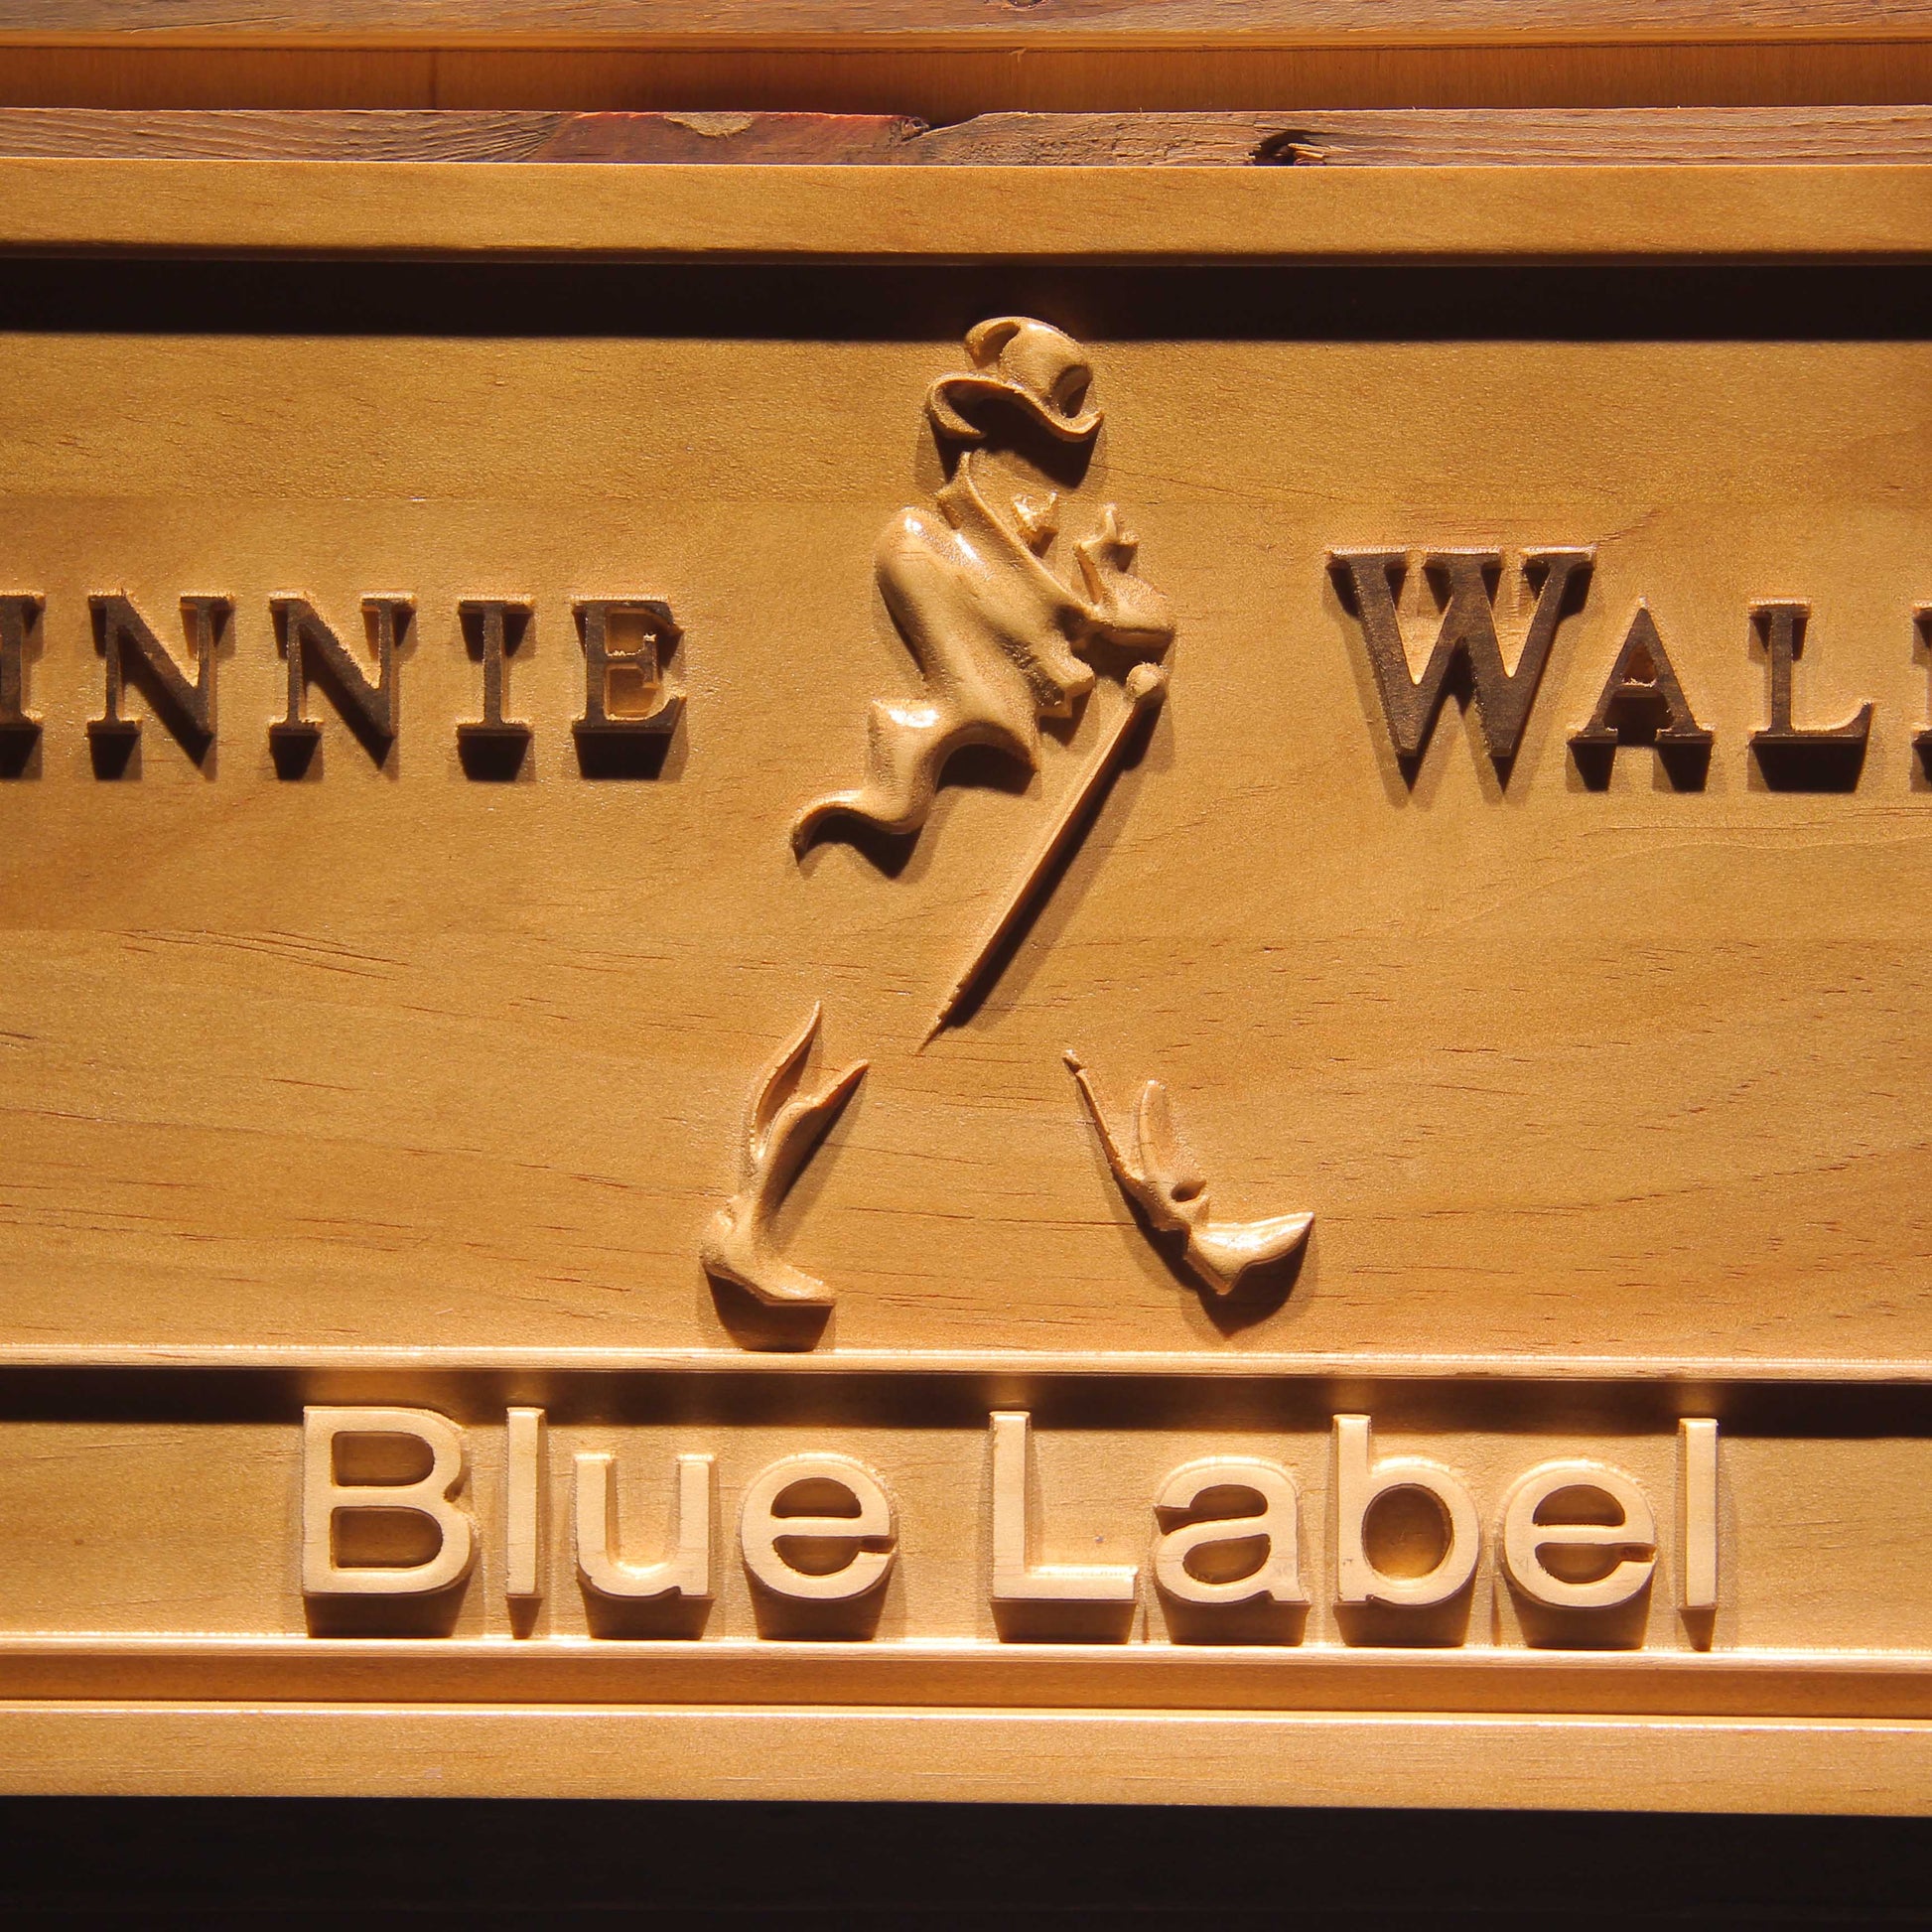 Johnnie Walker Blue Label Bar 3D Wooden Signs by Woody Signs Co. - Handmade Crafted Unique Wooden Creative